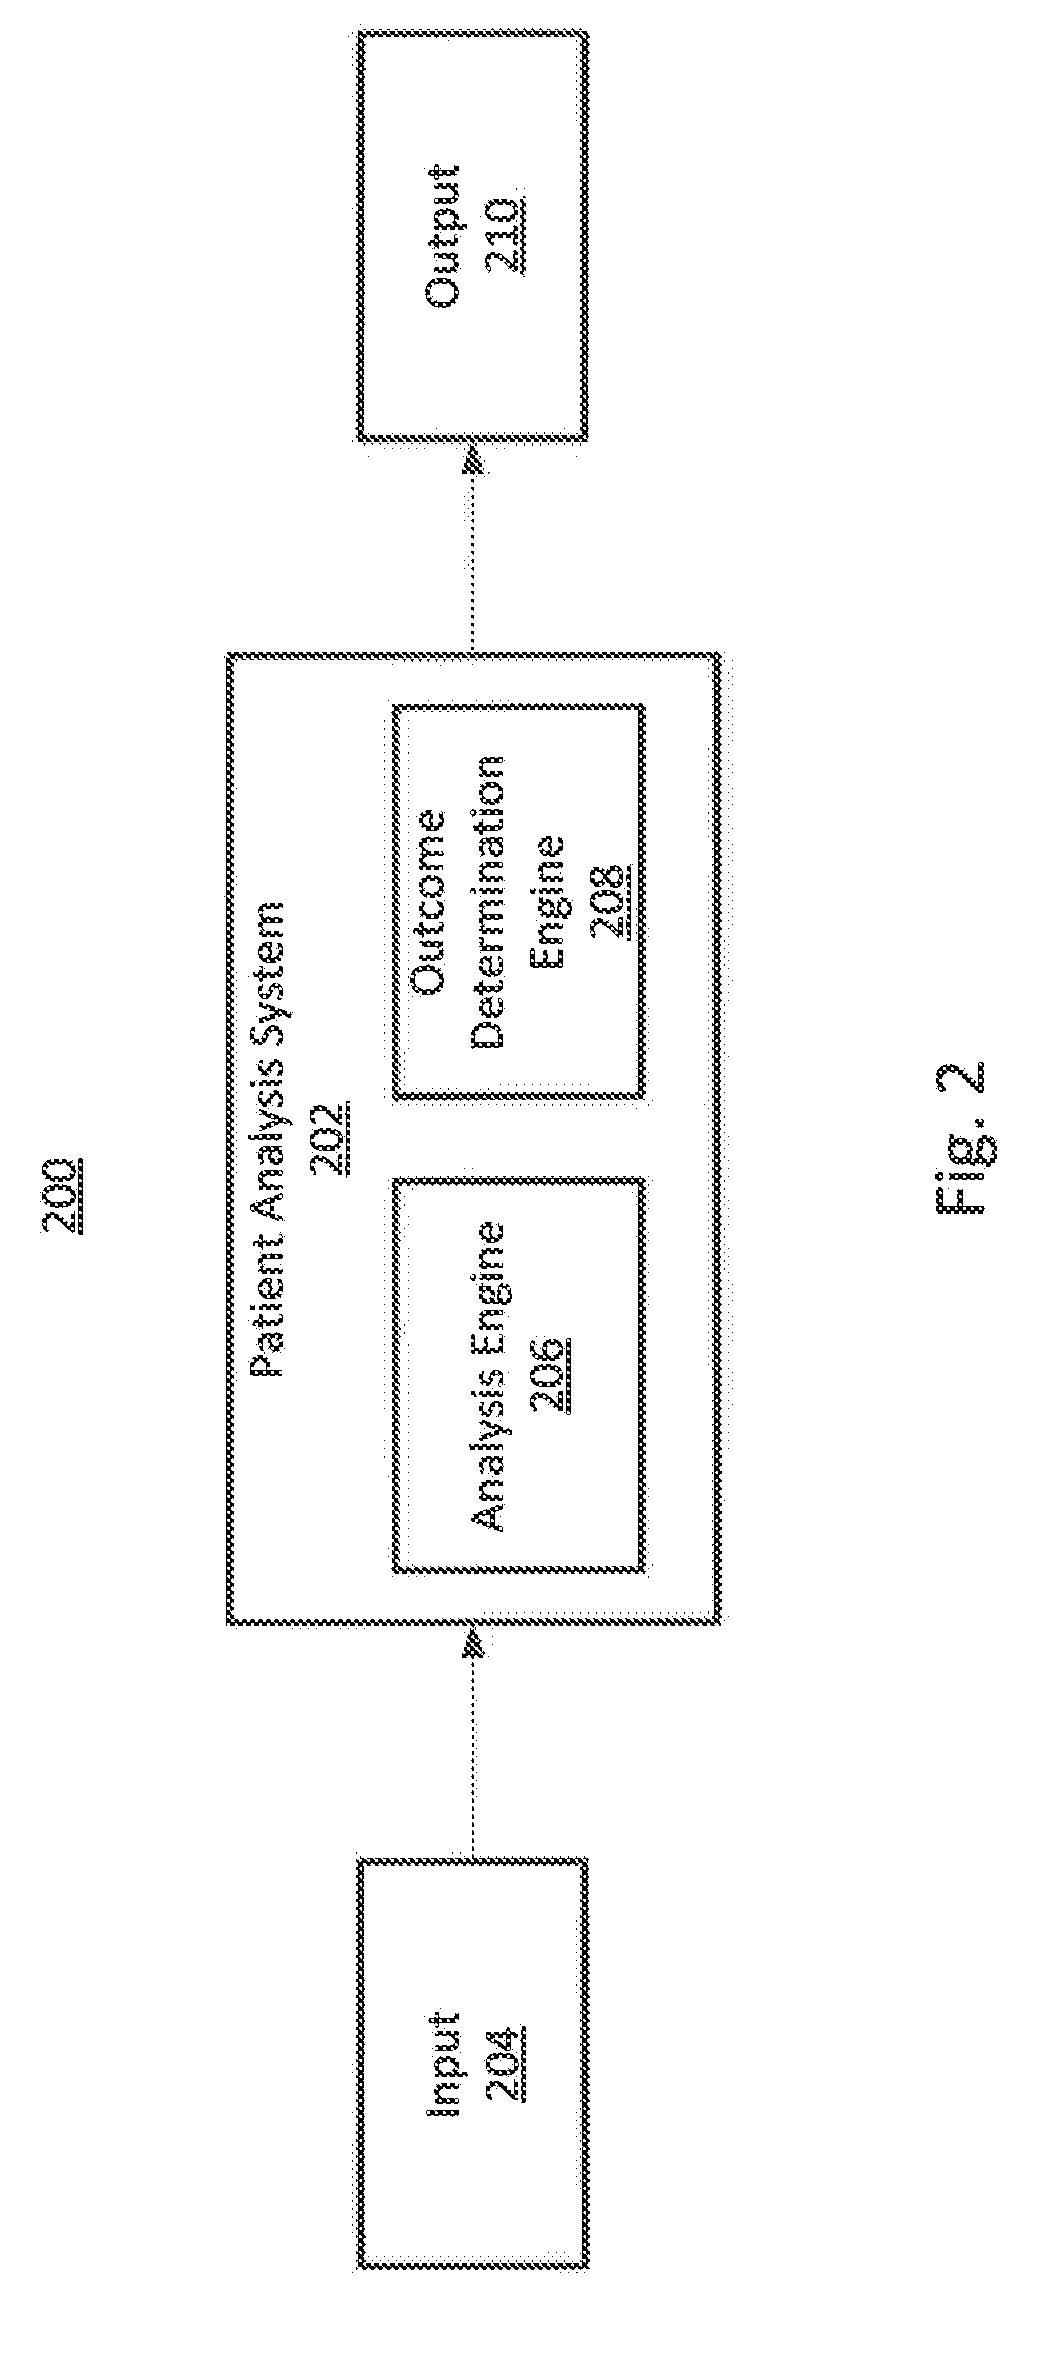 System and Method for Decision-Making for Determining Initiation and Type of Treatment for Patients with a Progressive Illness